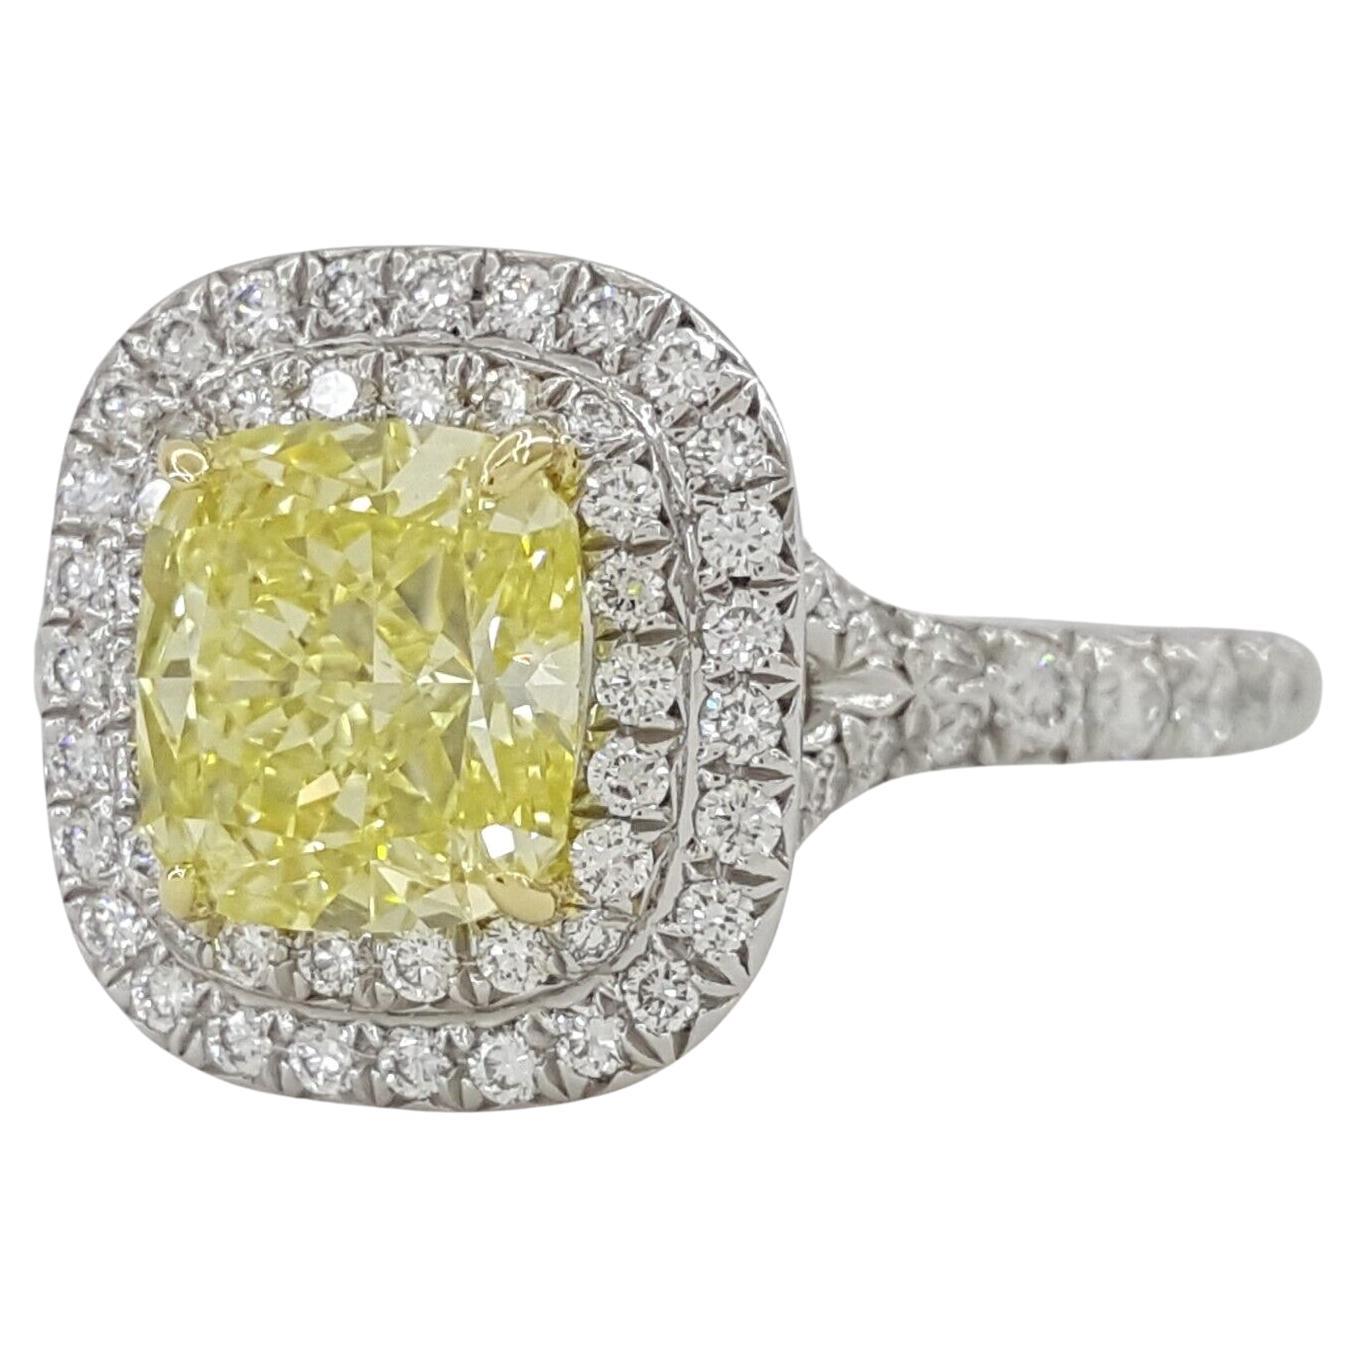 Tiffany & Co. Soleste Fancy Intense Yellow Halo Diamond Engagement Ring In Excellent Condition For Sale In Rome, IT